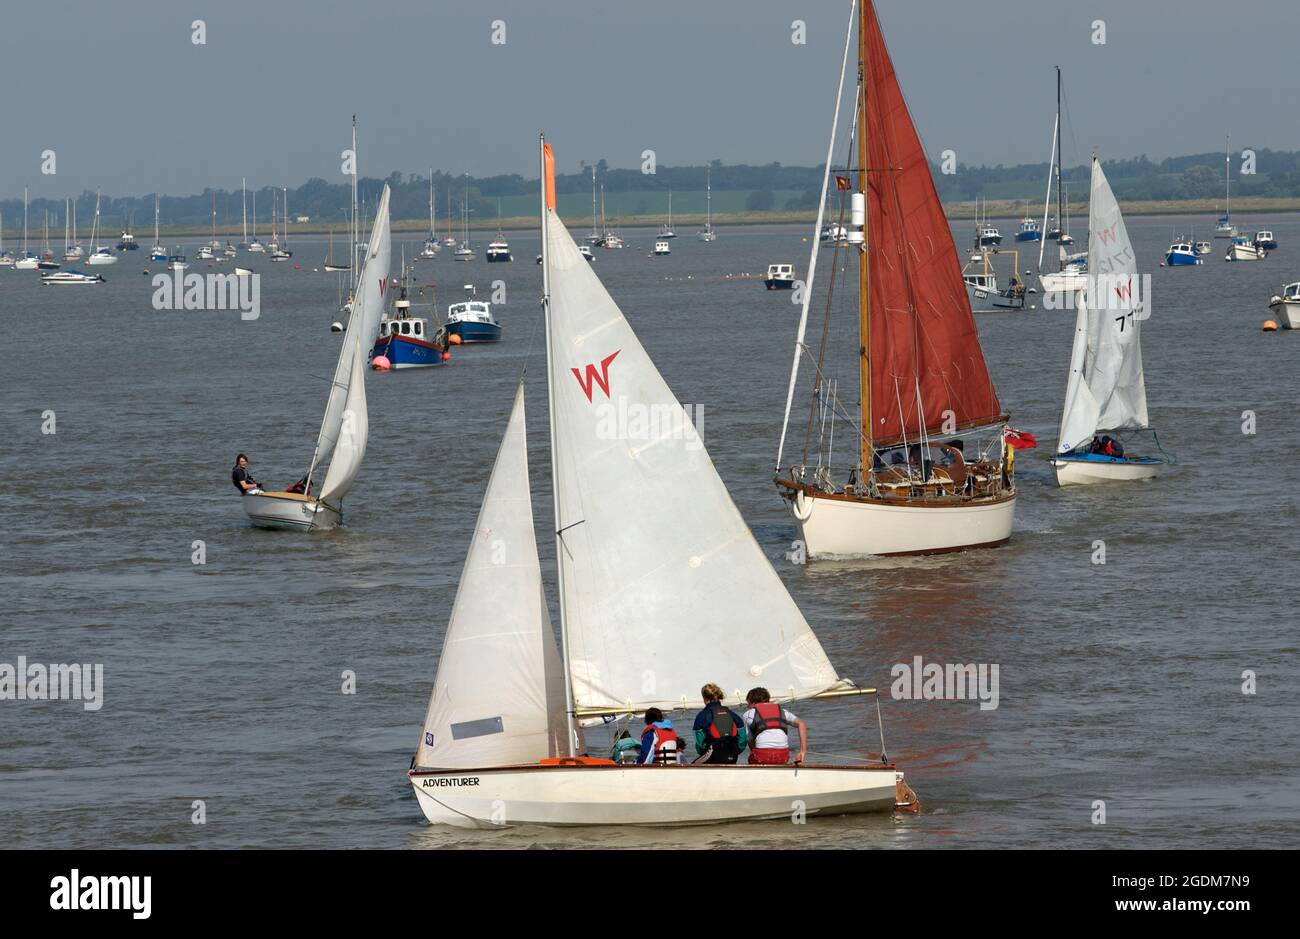 Sailing on the river Deben, Bawdsey Ferry, Suffolk, UK. Stock Photo